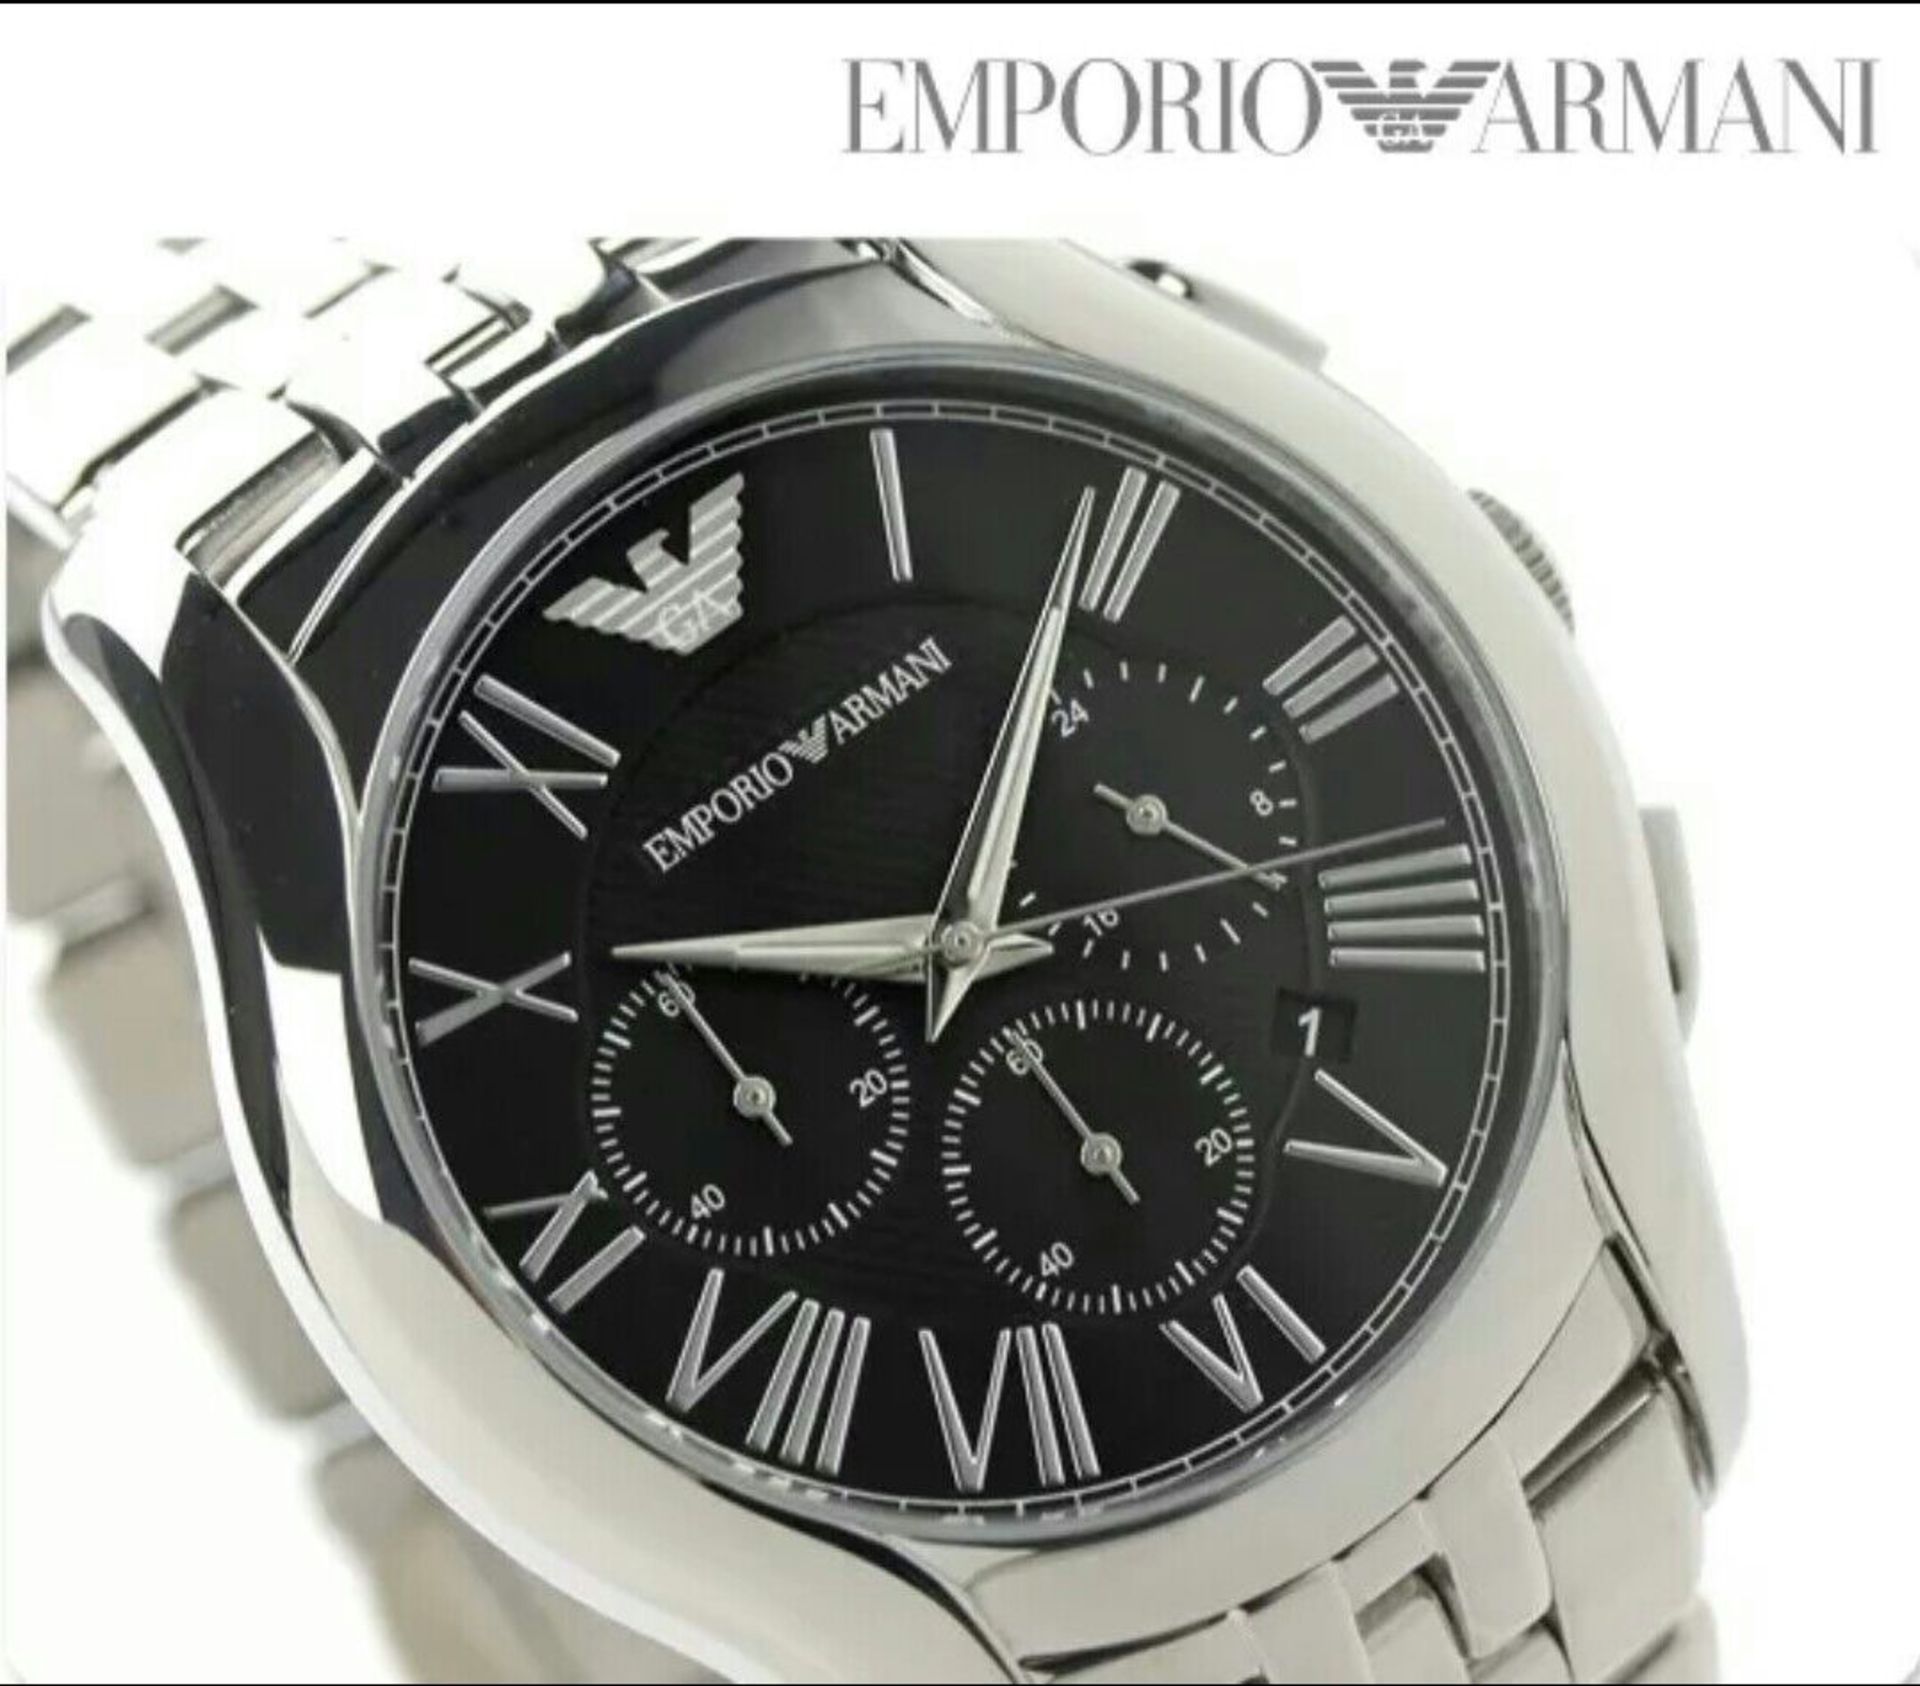 10 X BRAND NEW EMPORIO ARMANI DESIGNER WATCHES, COMPLETE WITH ORIGINAL ARMANI WATCH BOXES, MANUALS & - Image 5 of 10